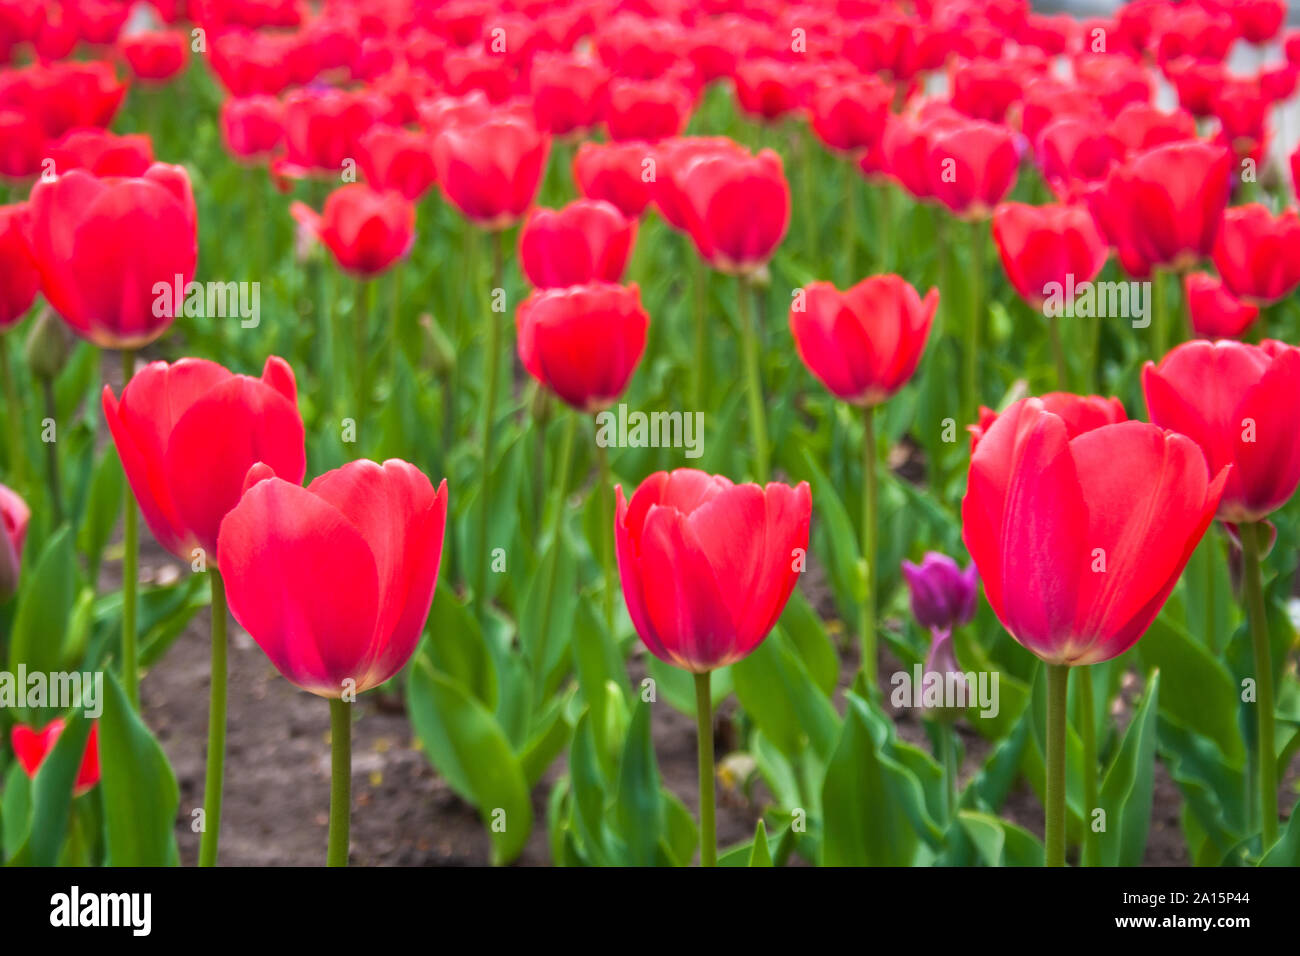 Beautiful red tulips with green leaves, blurred background in tulips field or in the garden on spring Stock Photo